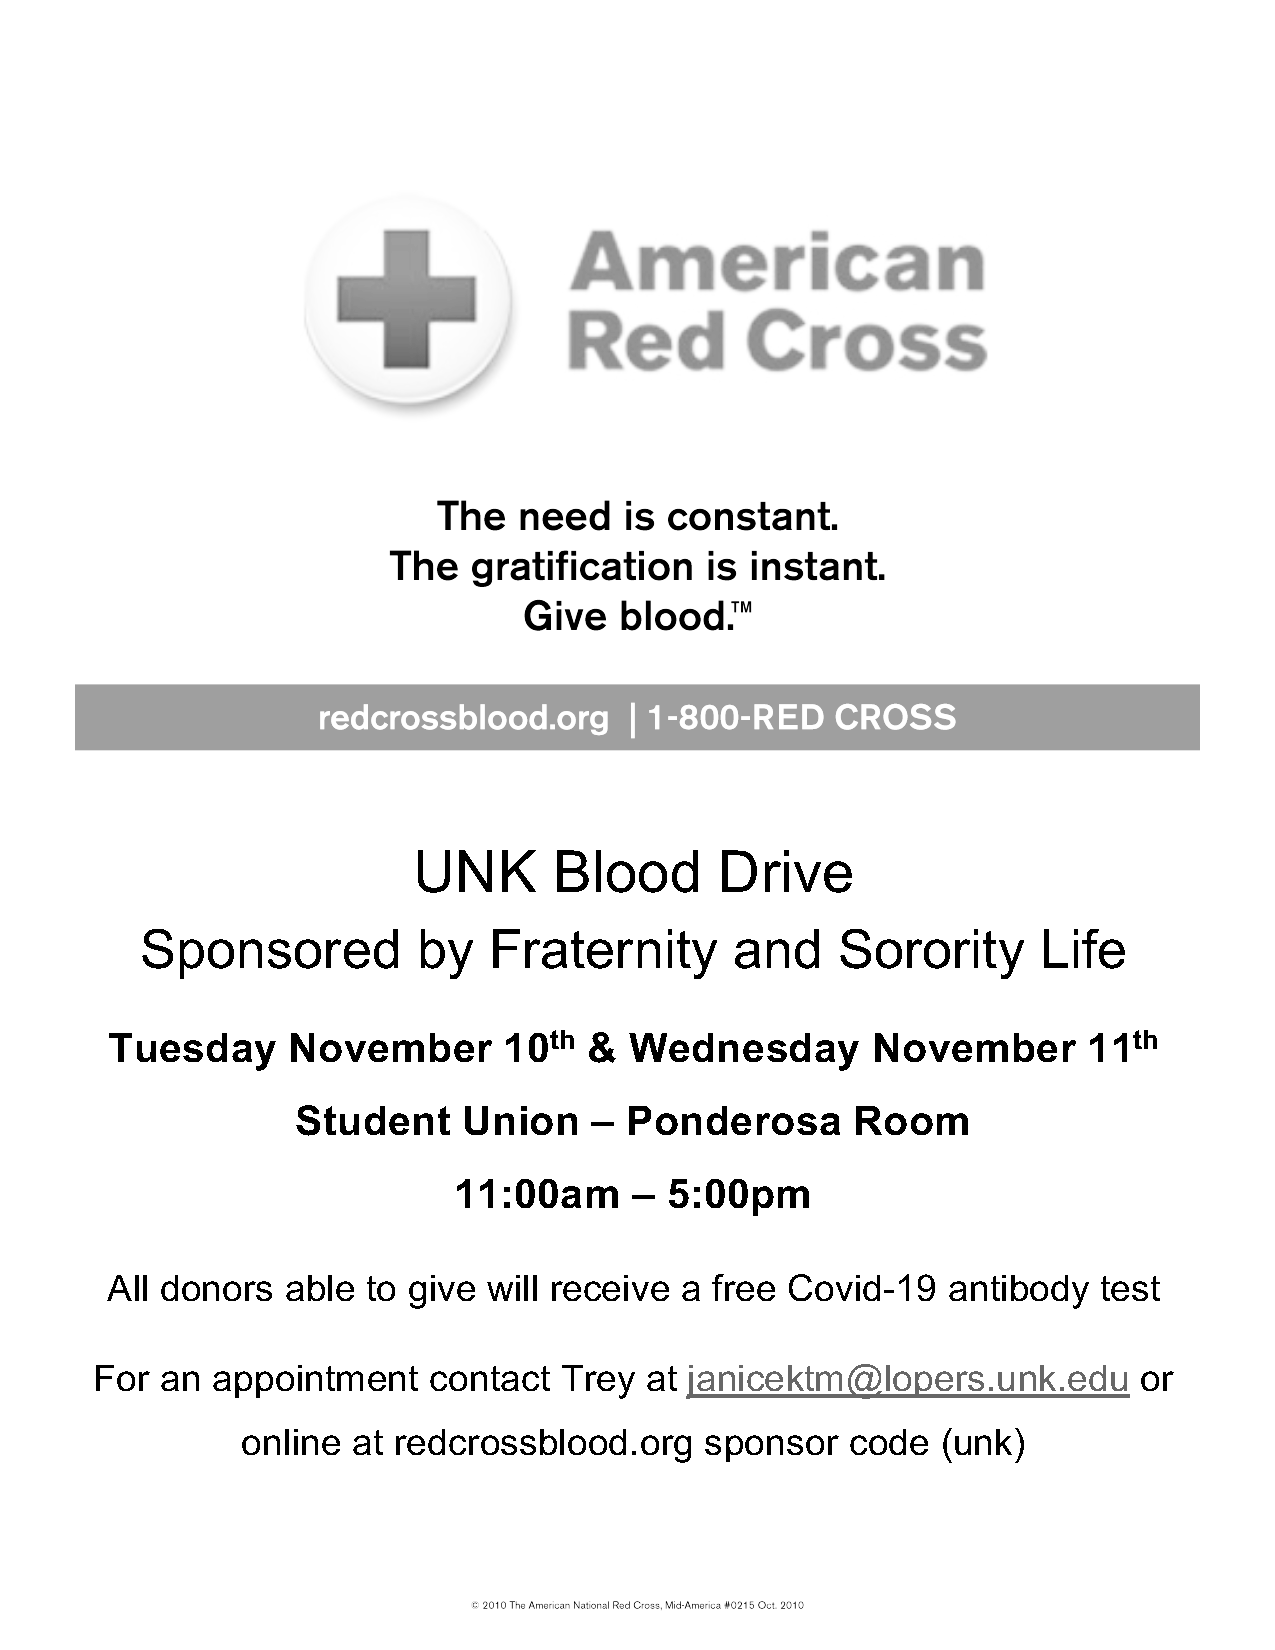 Fraternity and Sorority Life sponsored The American Red Cross blood drive.